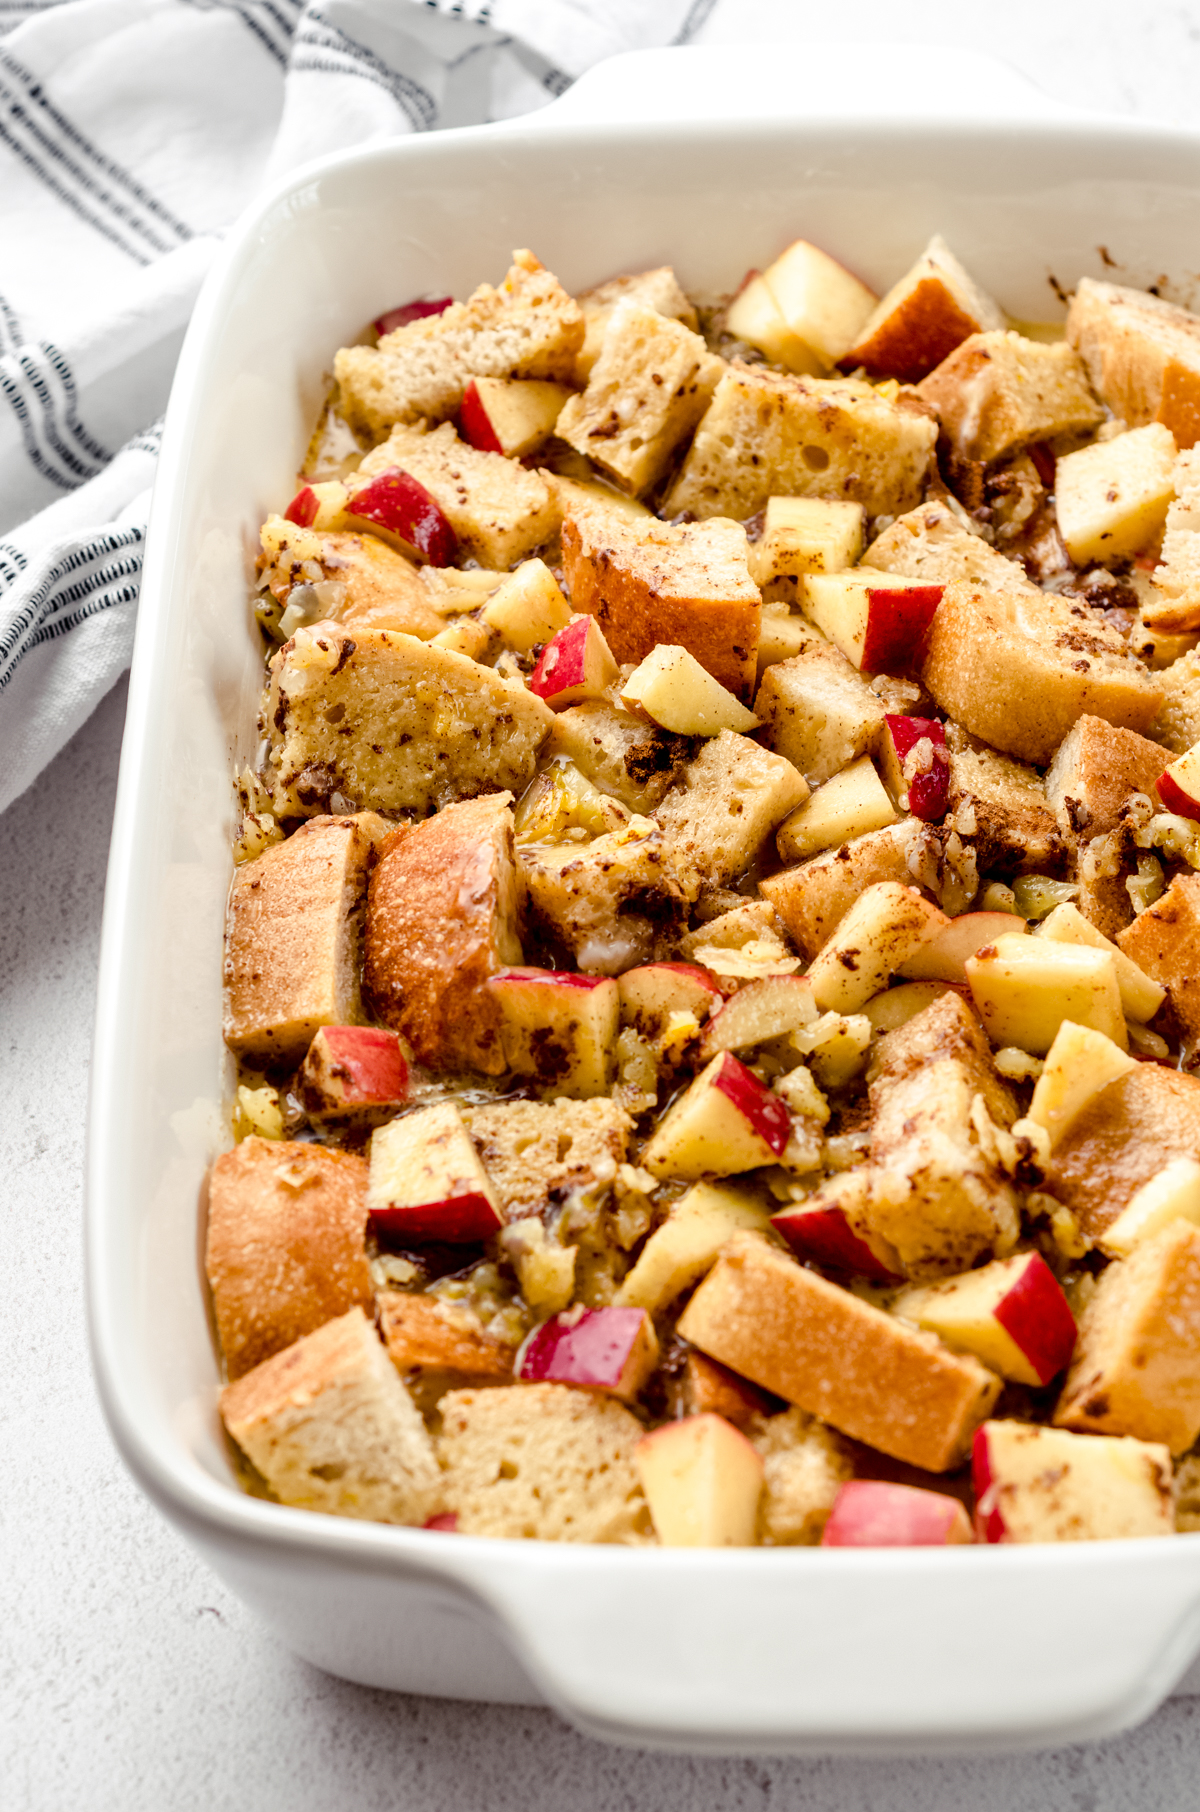 Apples and bread cubes soaking in a cinnamon custard in a casserole dish to make apple French toast casserole.